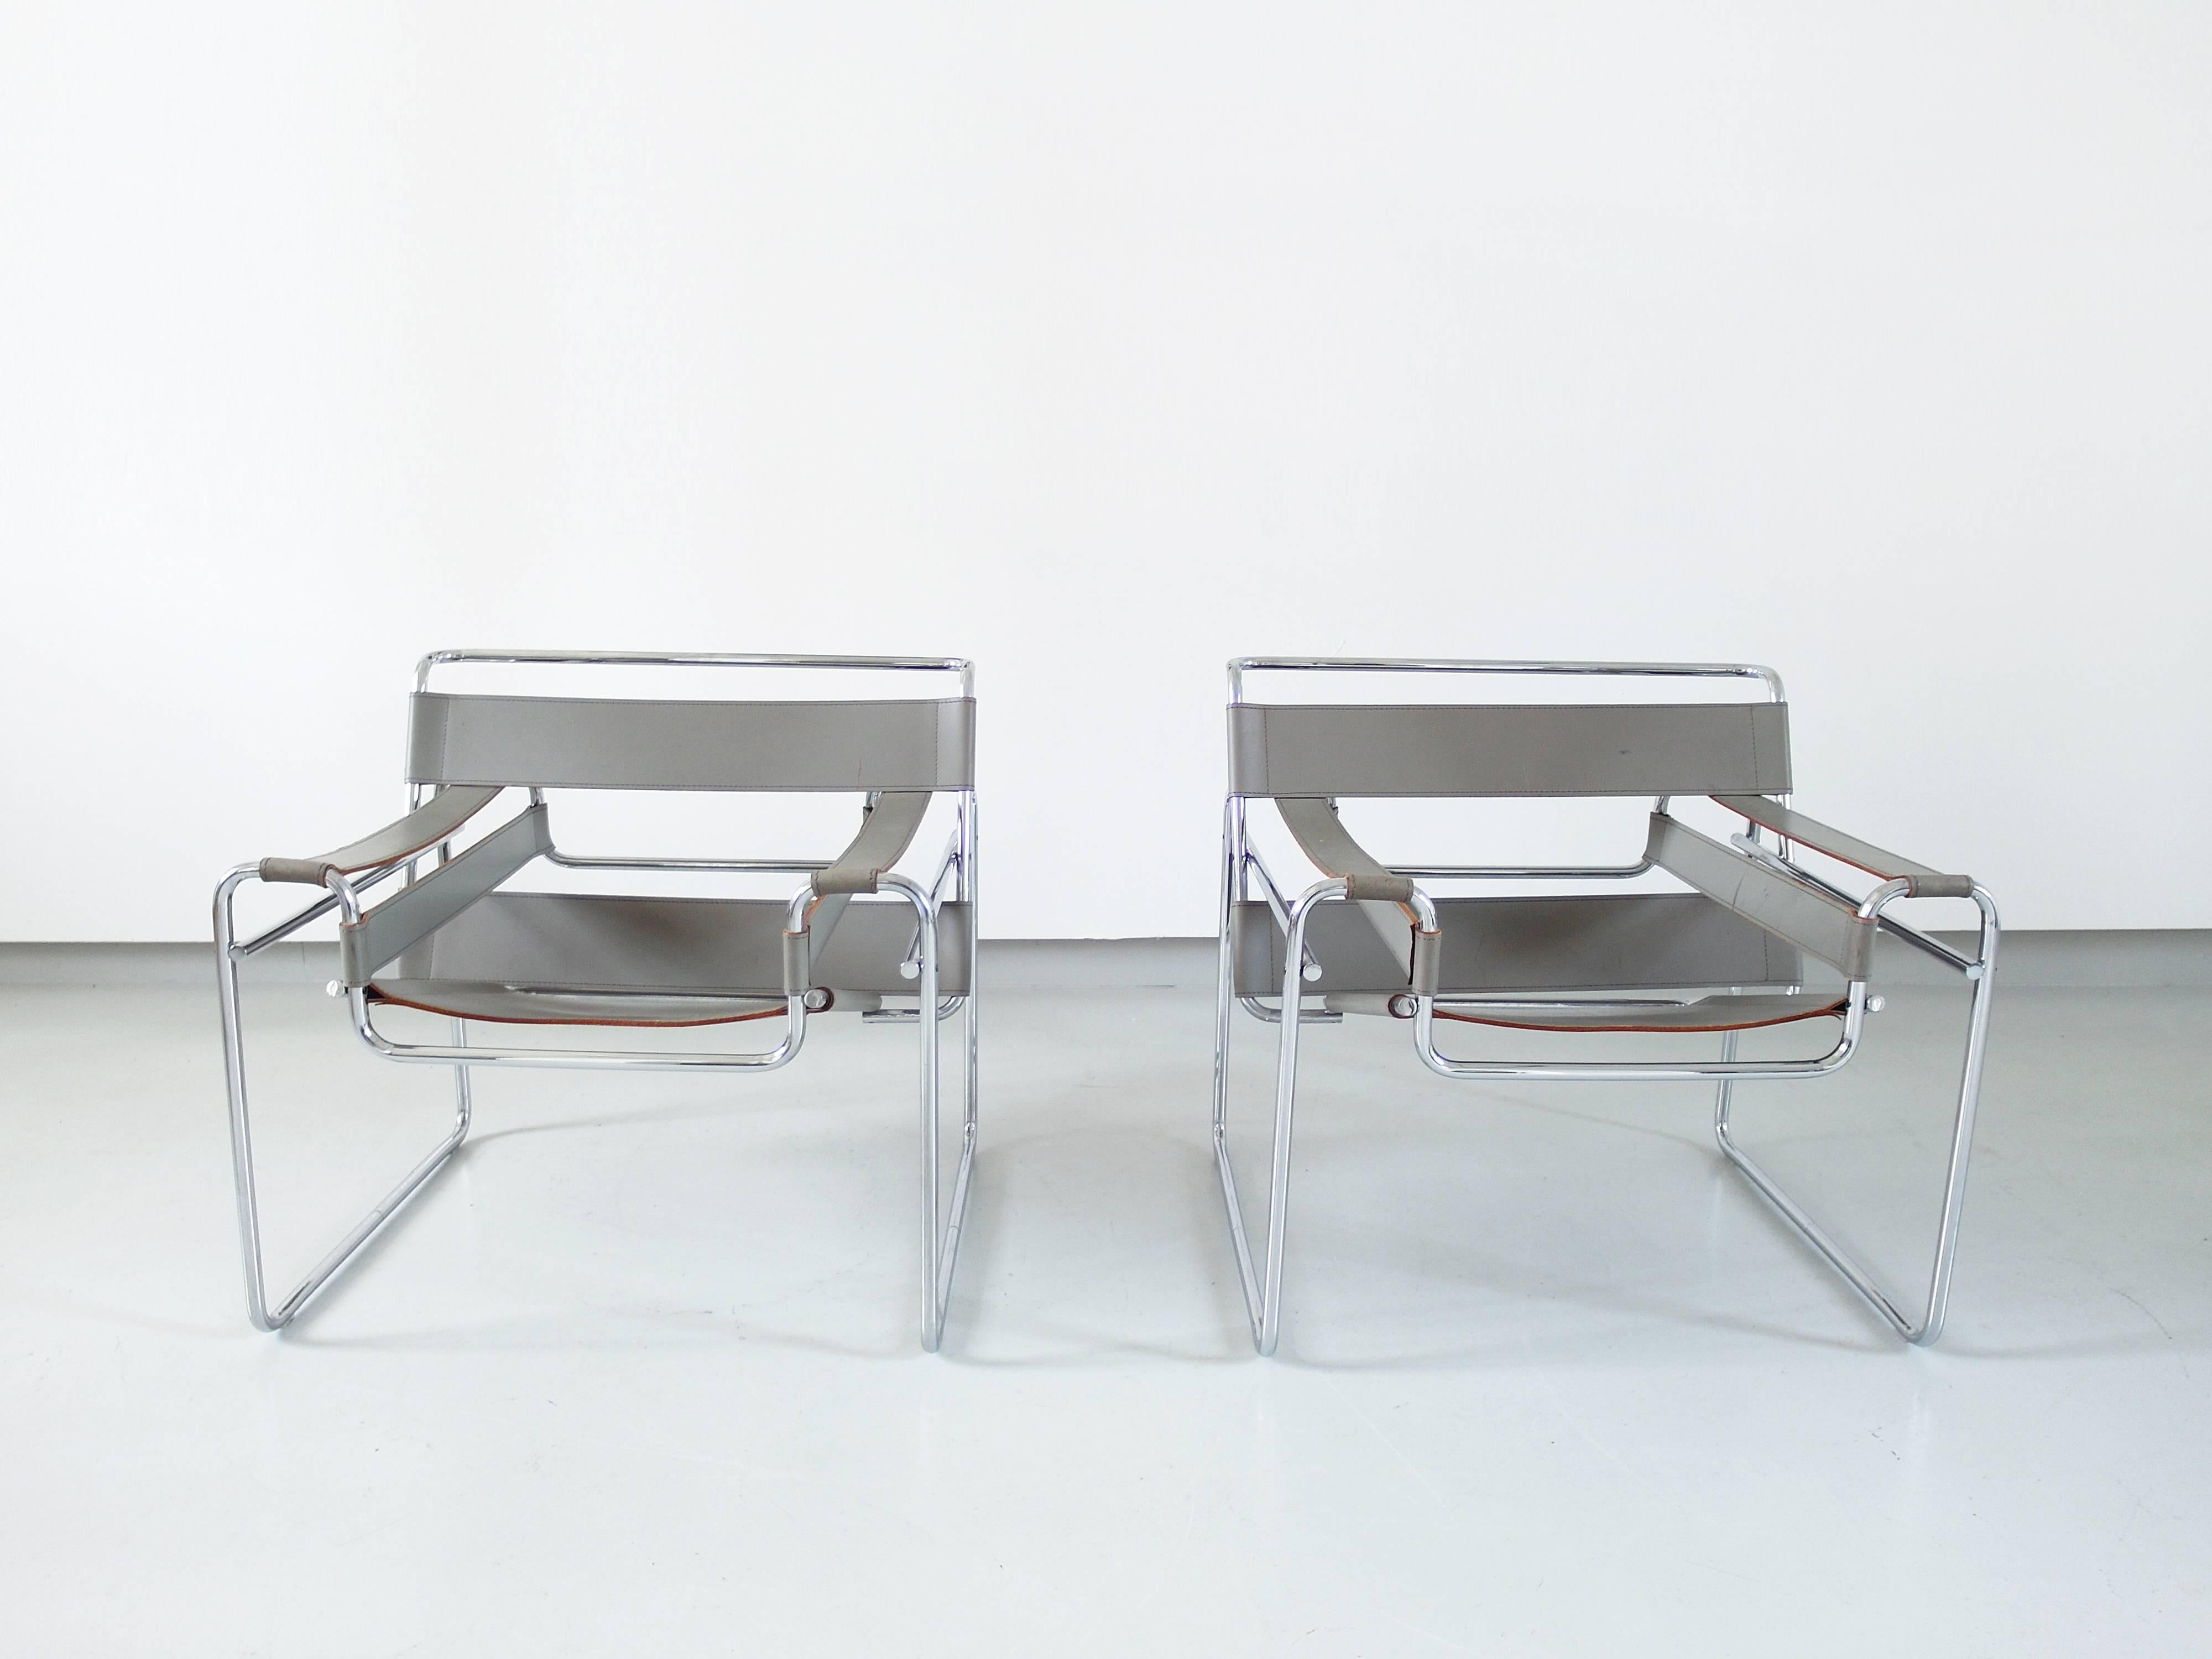 A pair of grey leather Wassily chairs, designed in 1925 by Marcel Breuer and manufactured by Knoll, circa 1980.
Inspired by the frame of a bicycle and influenced by the constructivist theories of the De Stijl movement, Marcel Breuer was still an